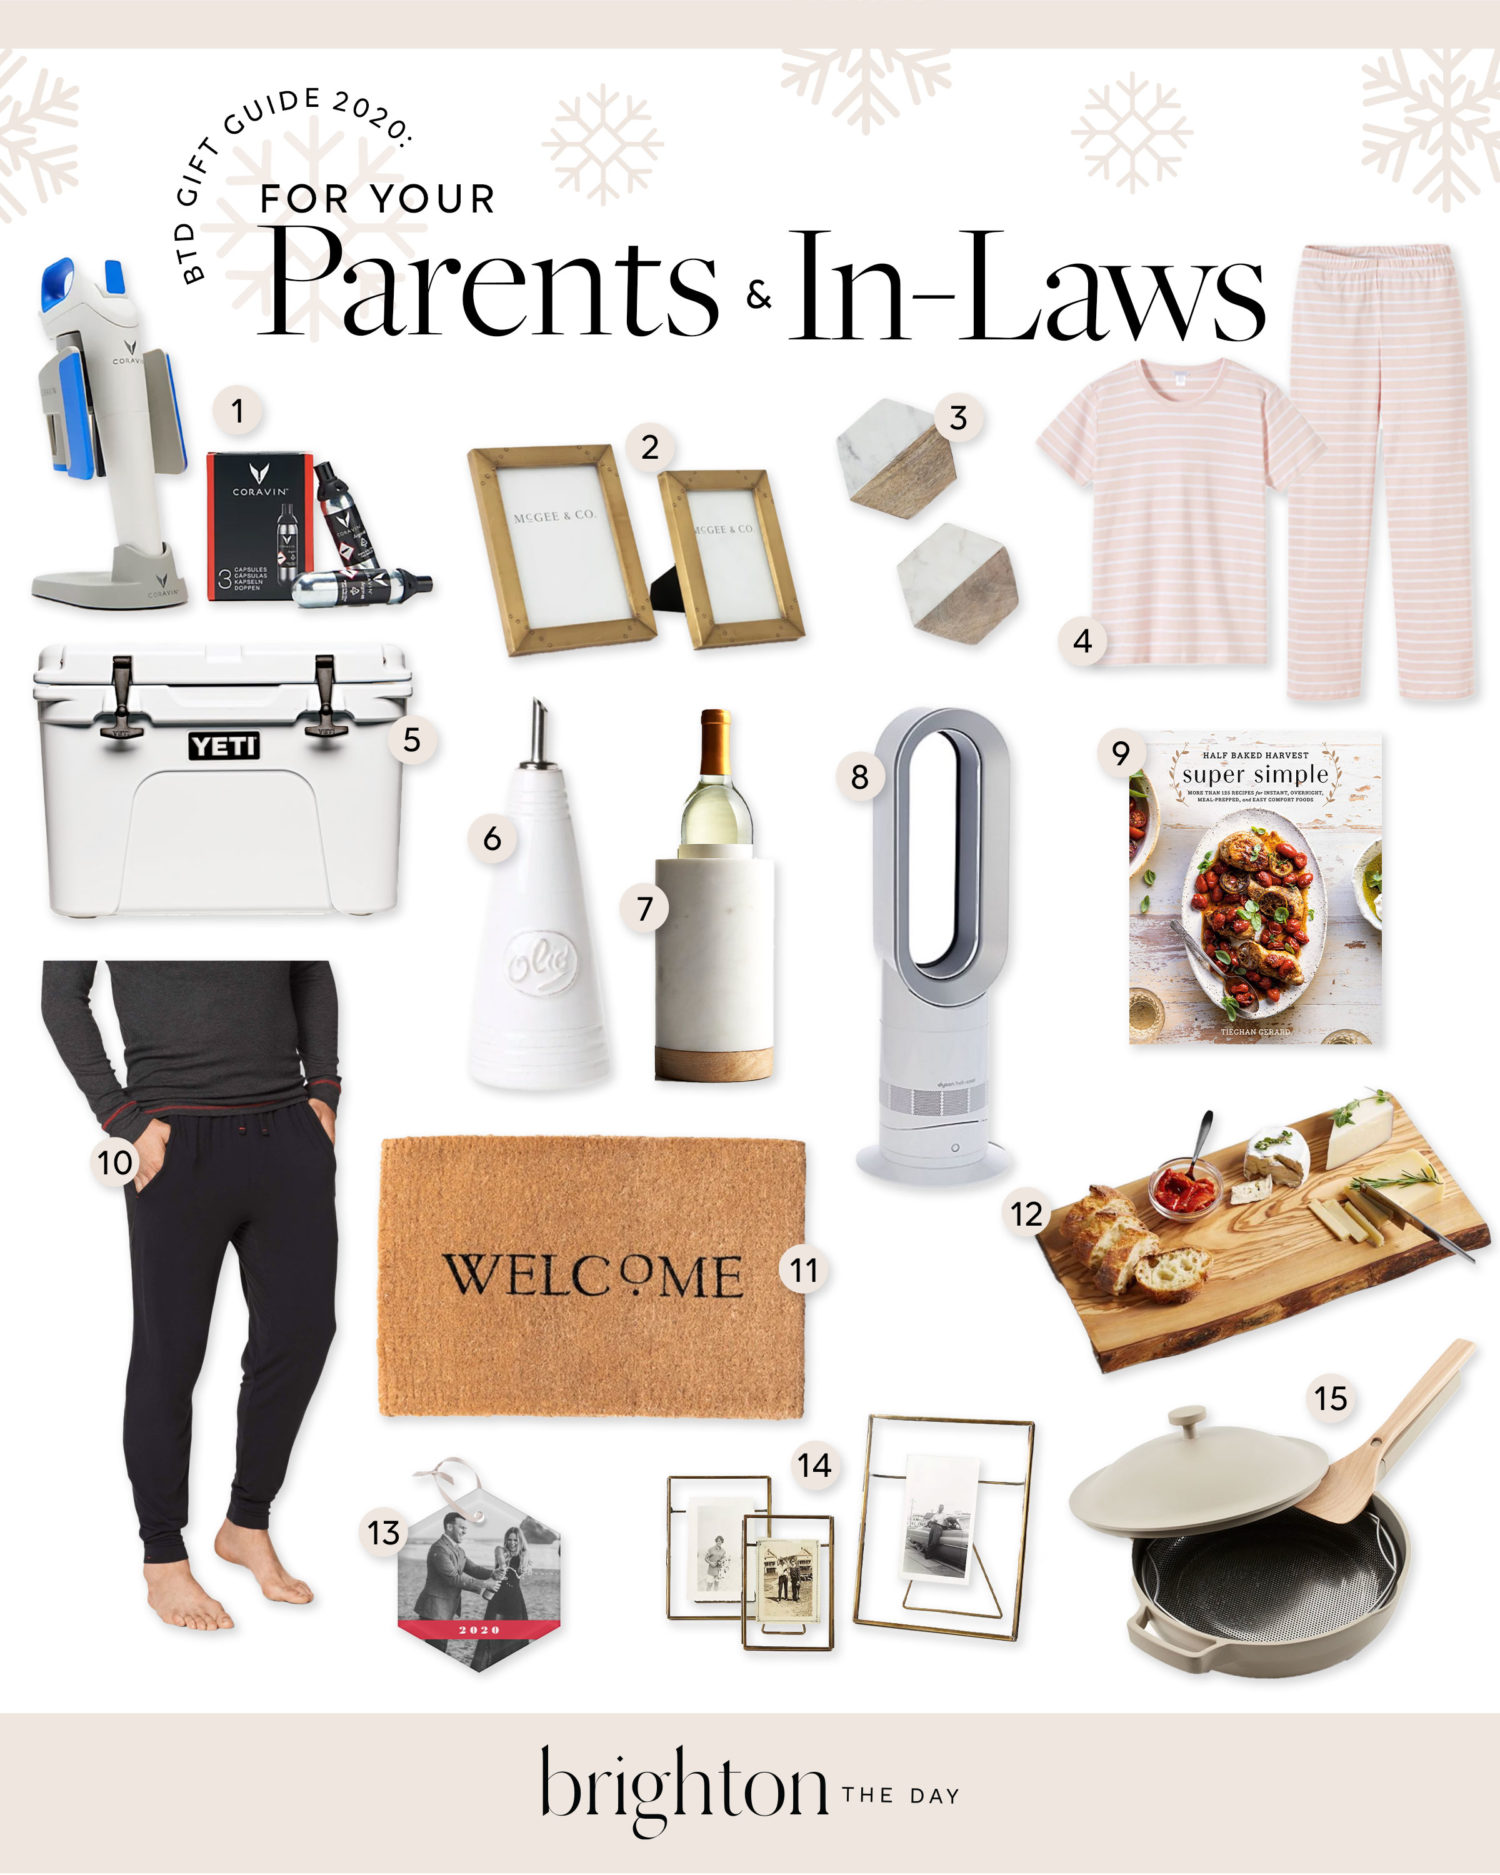 gift guide for parents and in-laws, gift ideas for mom and dad or your in-laws